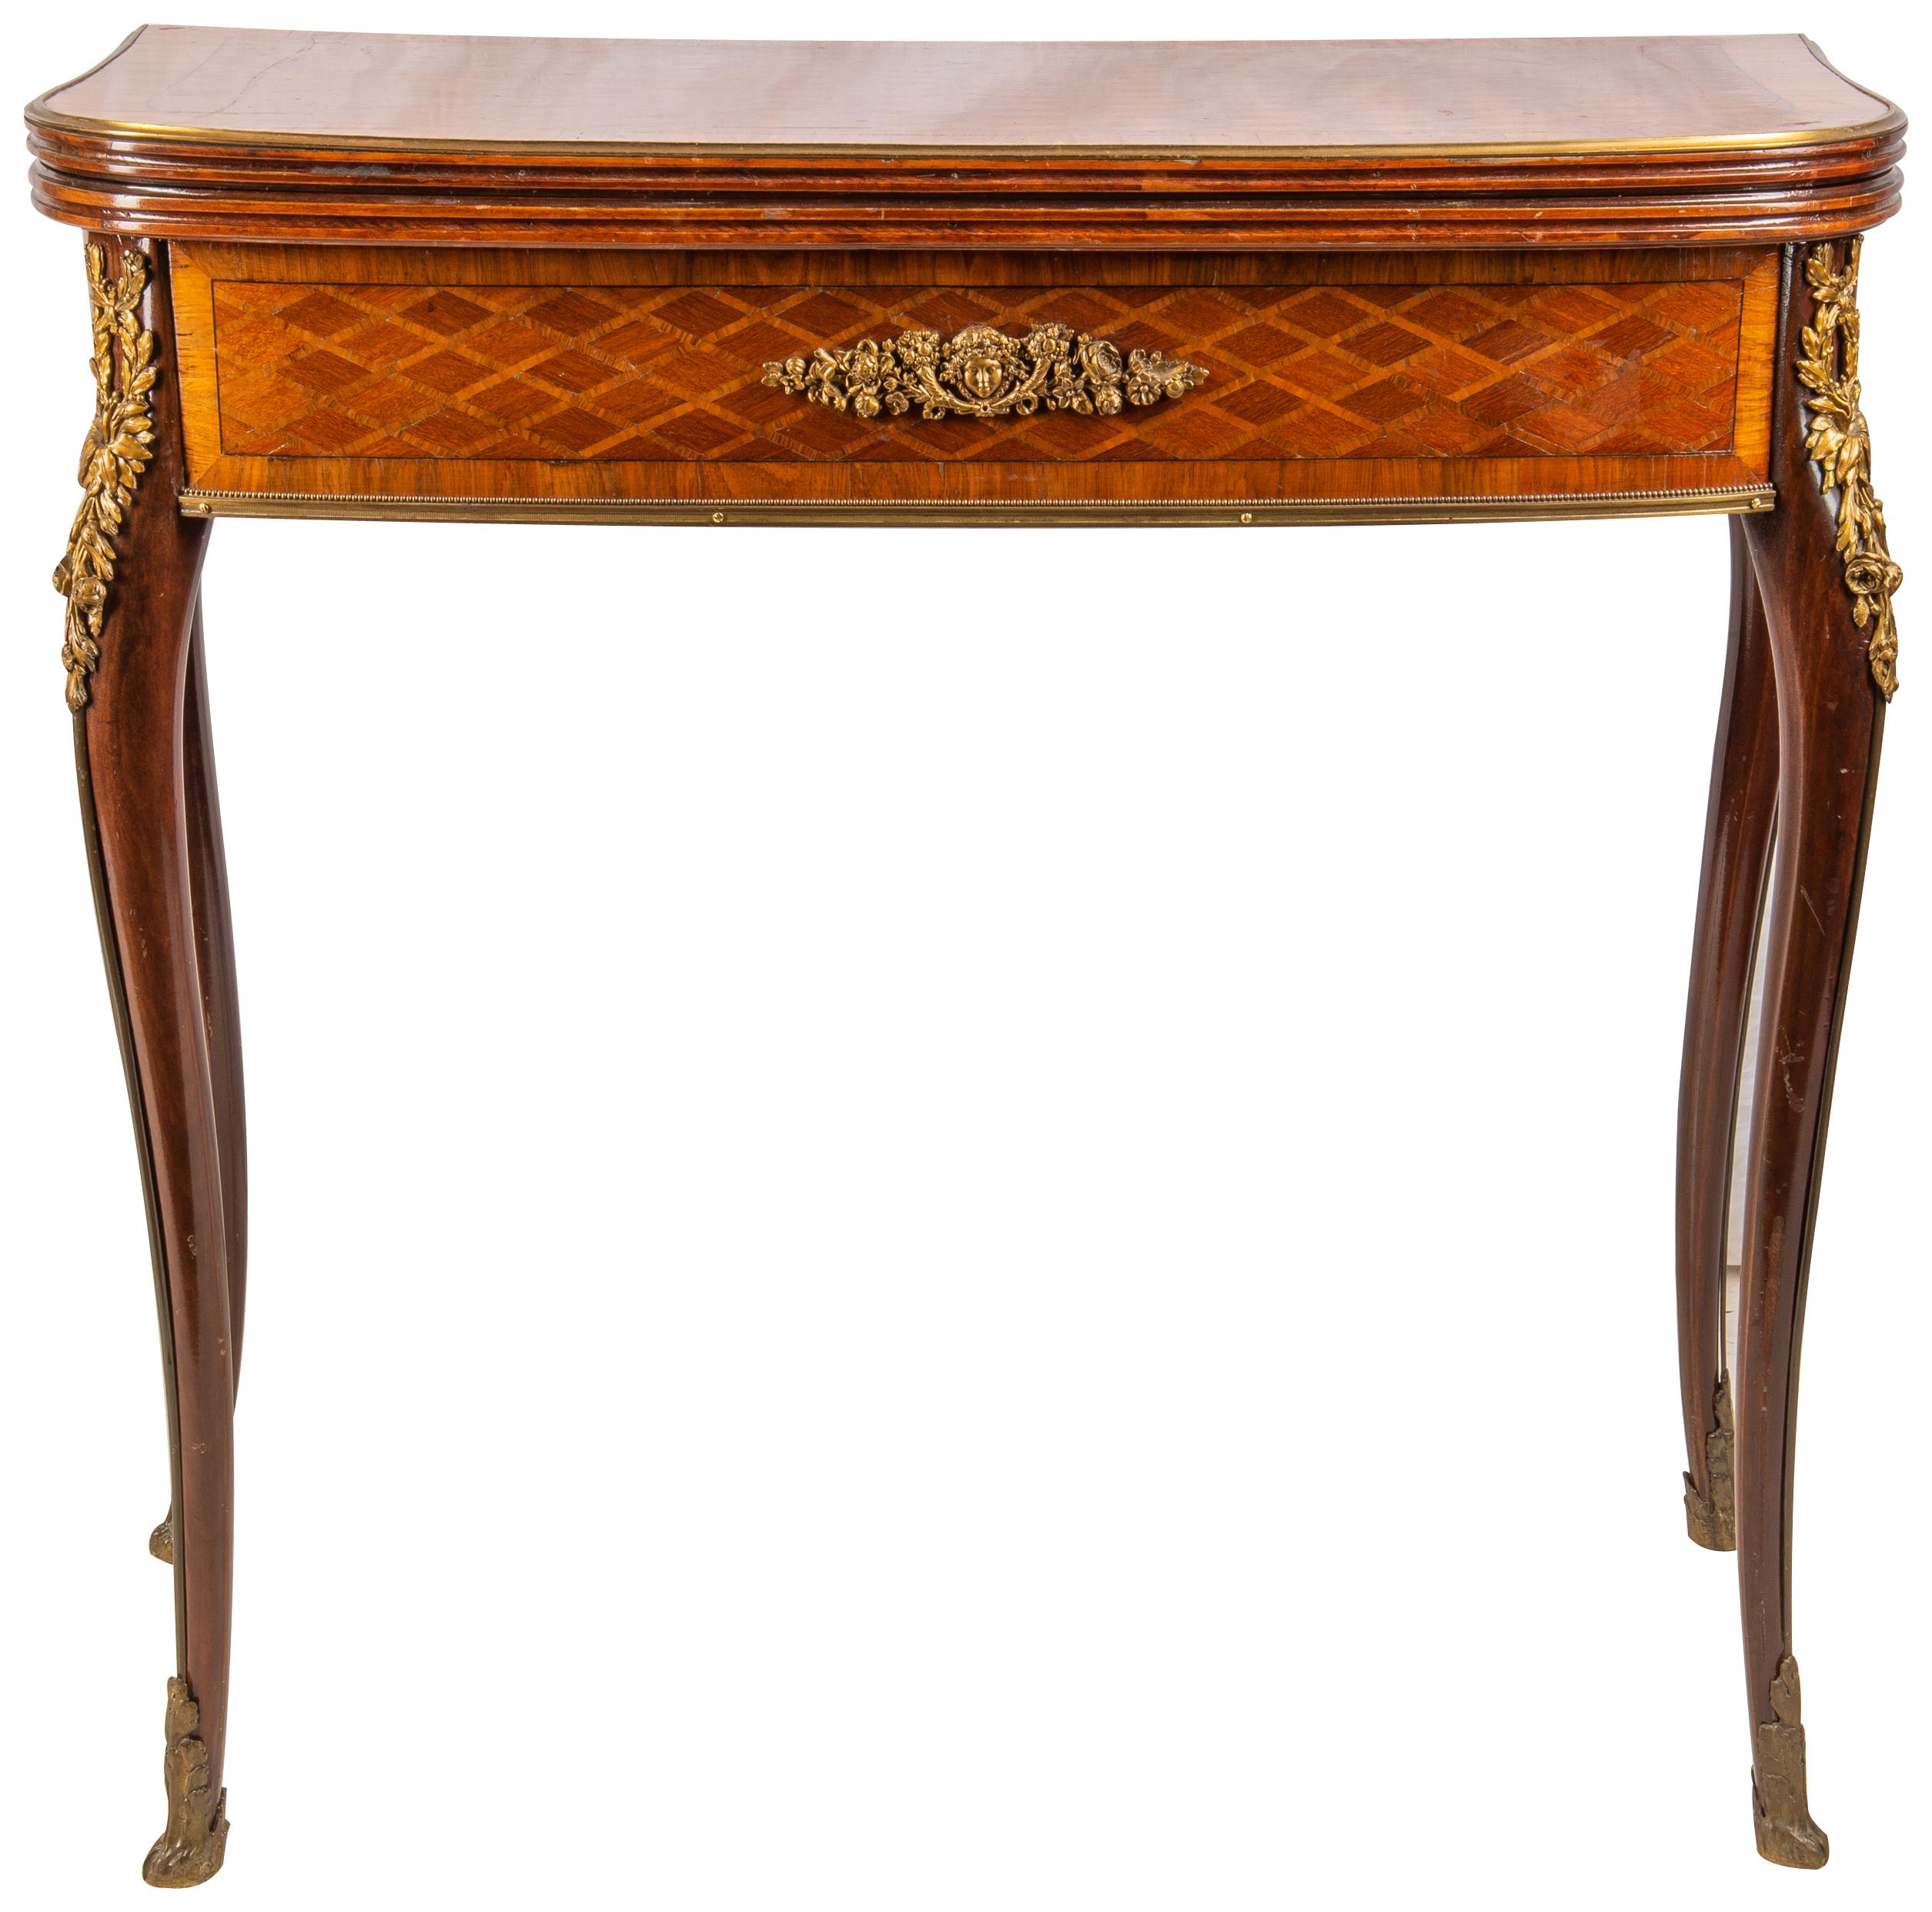 A very good quality late 19th century French parquetry inlaid folding card table in the Louis XVI style. The top opening to reveal a card table, parquetry inlay also to the frieze, gilded ormolu mounts, and raised on elegant cabriole legs.
In the